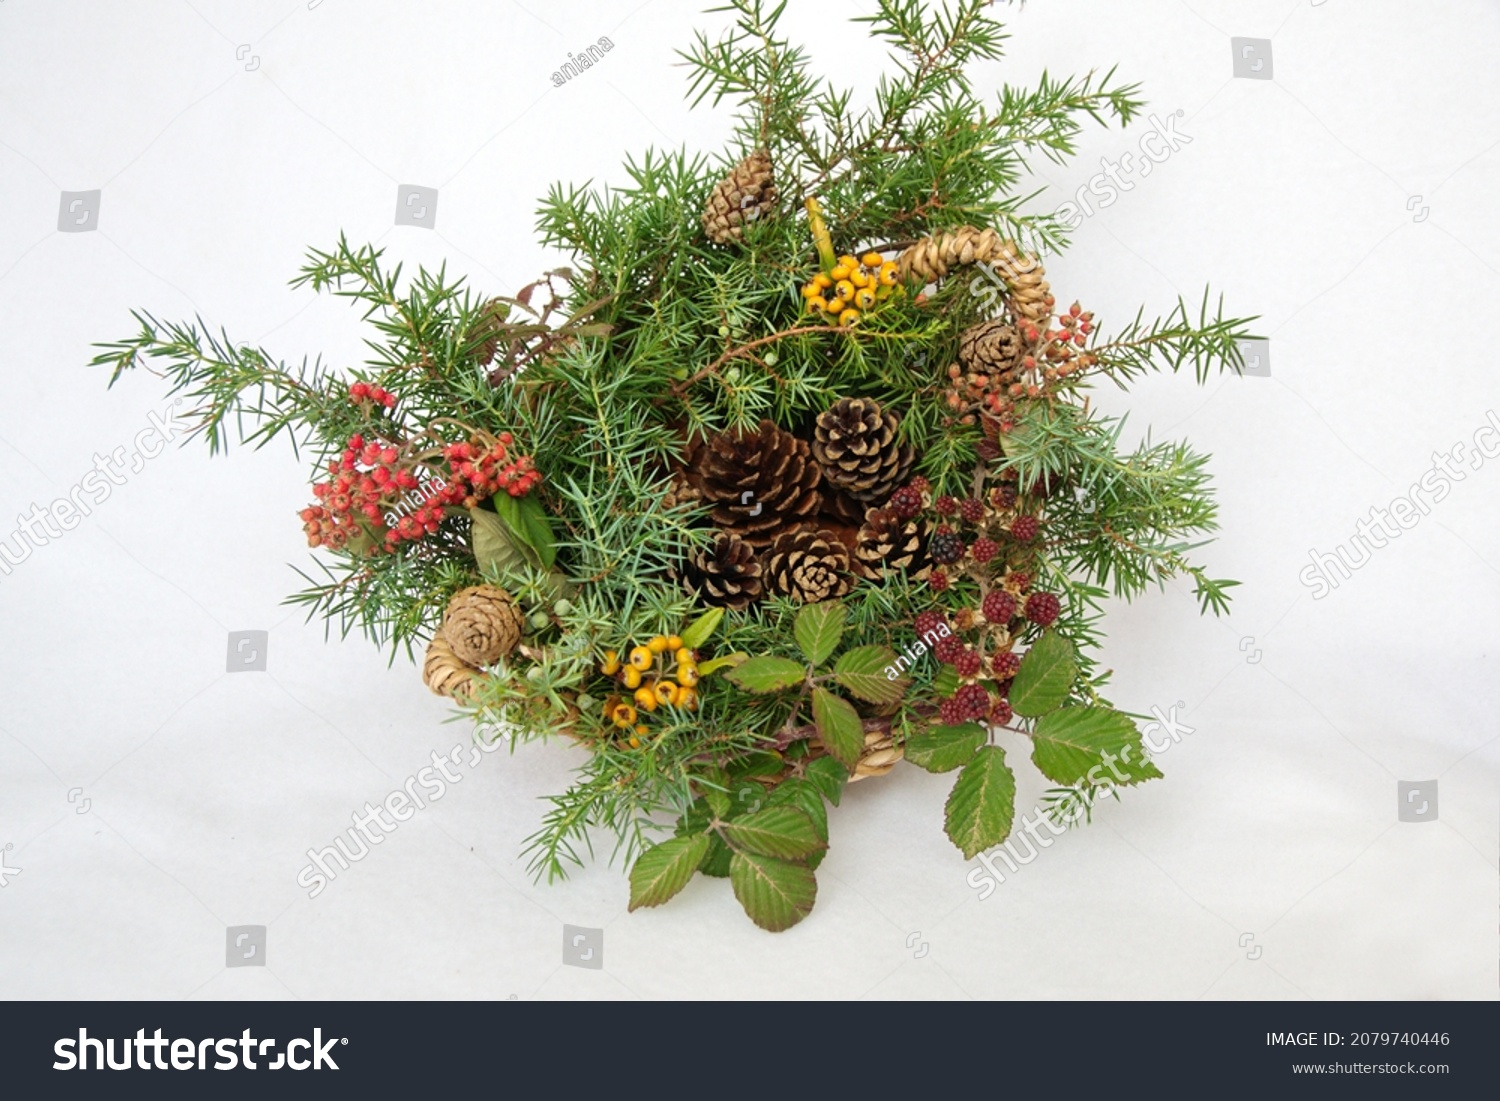 Christmas natural adornment with wild berries, conifer cones, spruce branches on white background #2079740446